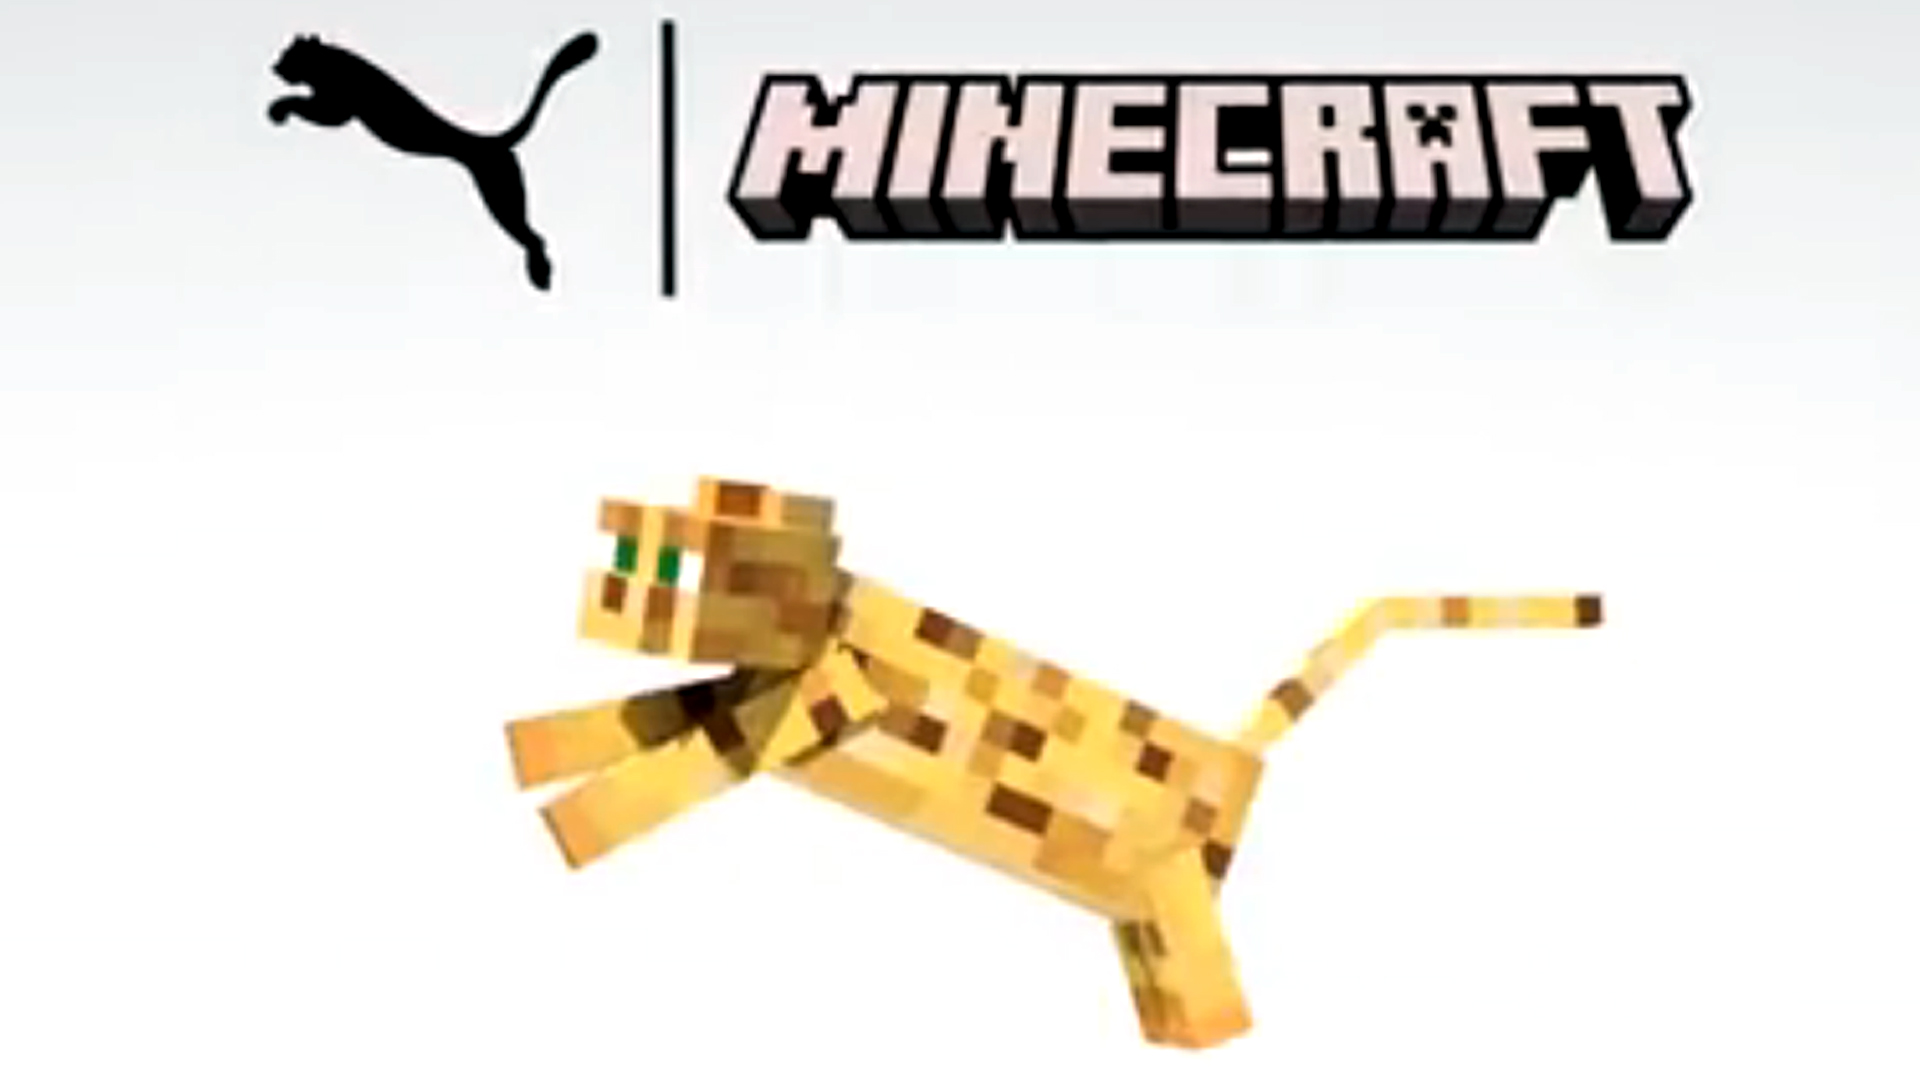 Minecraft is getting a Puma collab for some reason